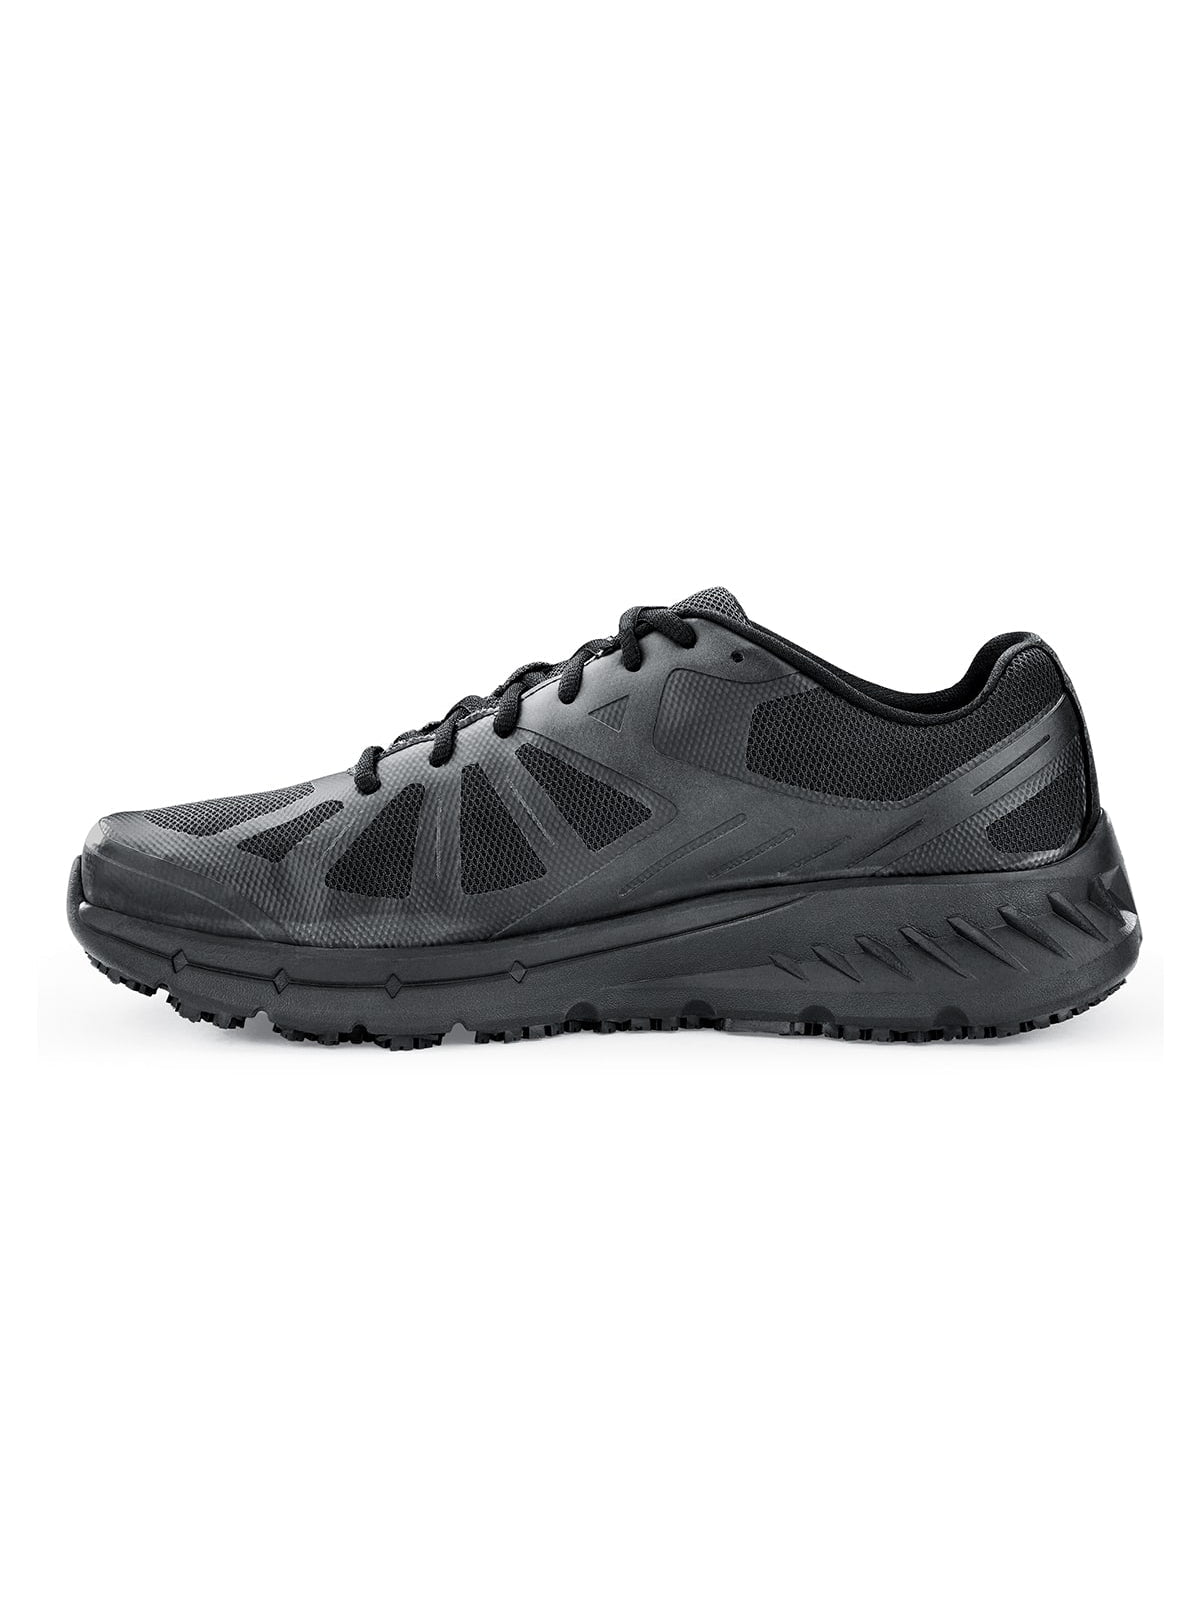 Women's Work Shoe Vitality II Black by Shoes For Crews -  ChefsCotton